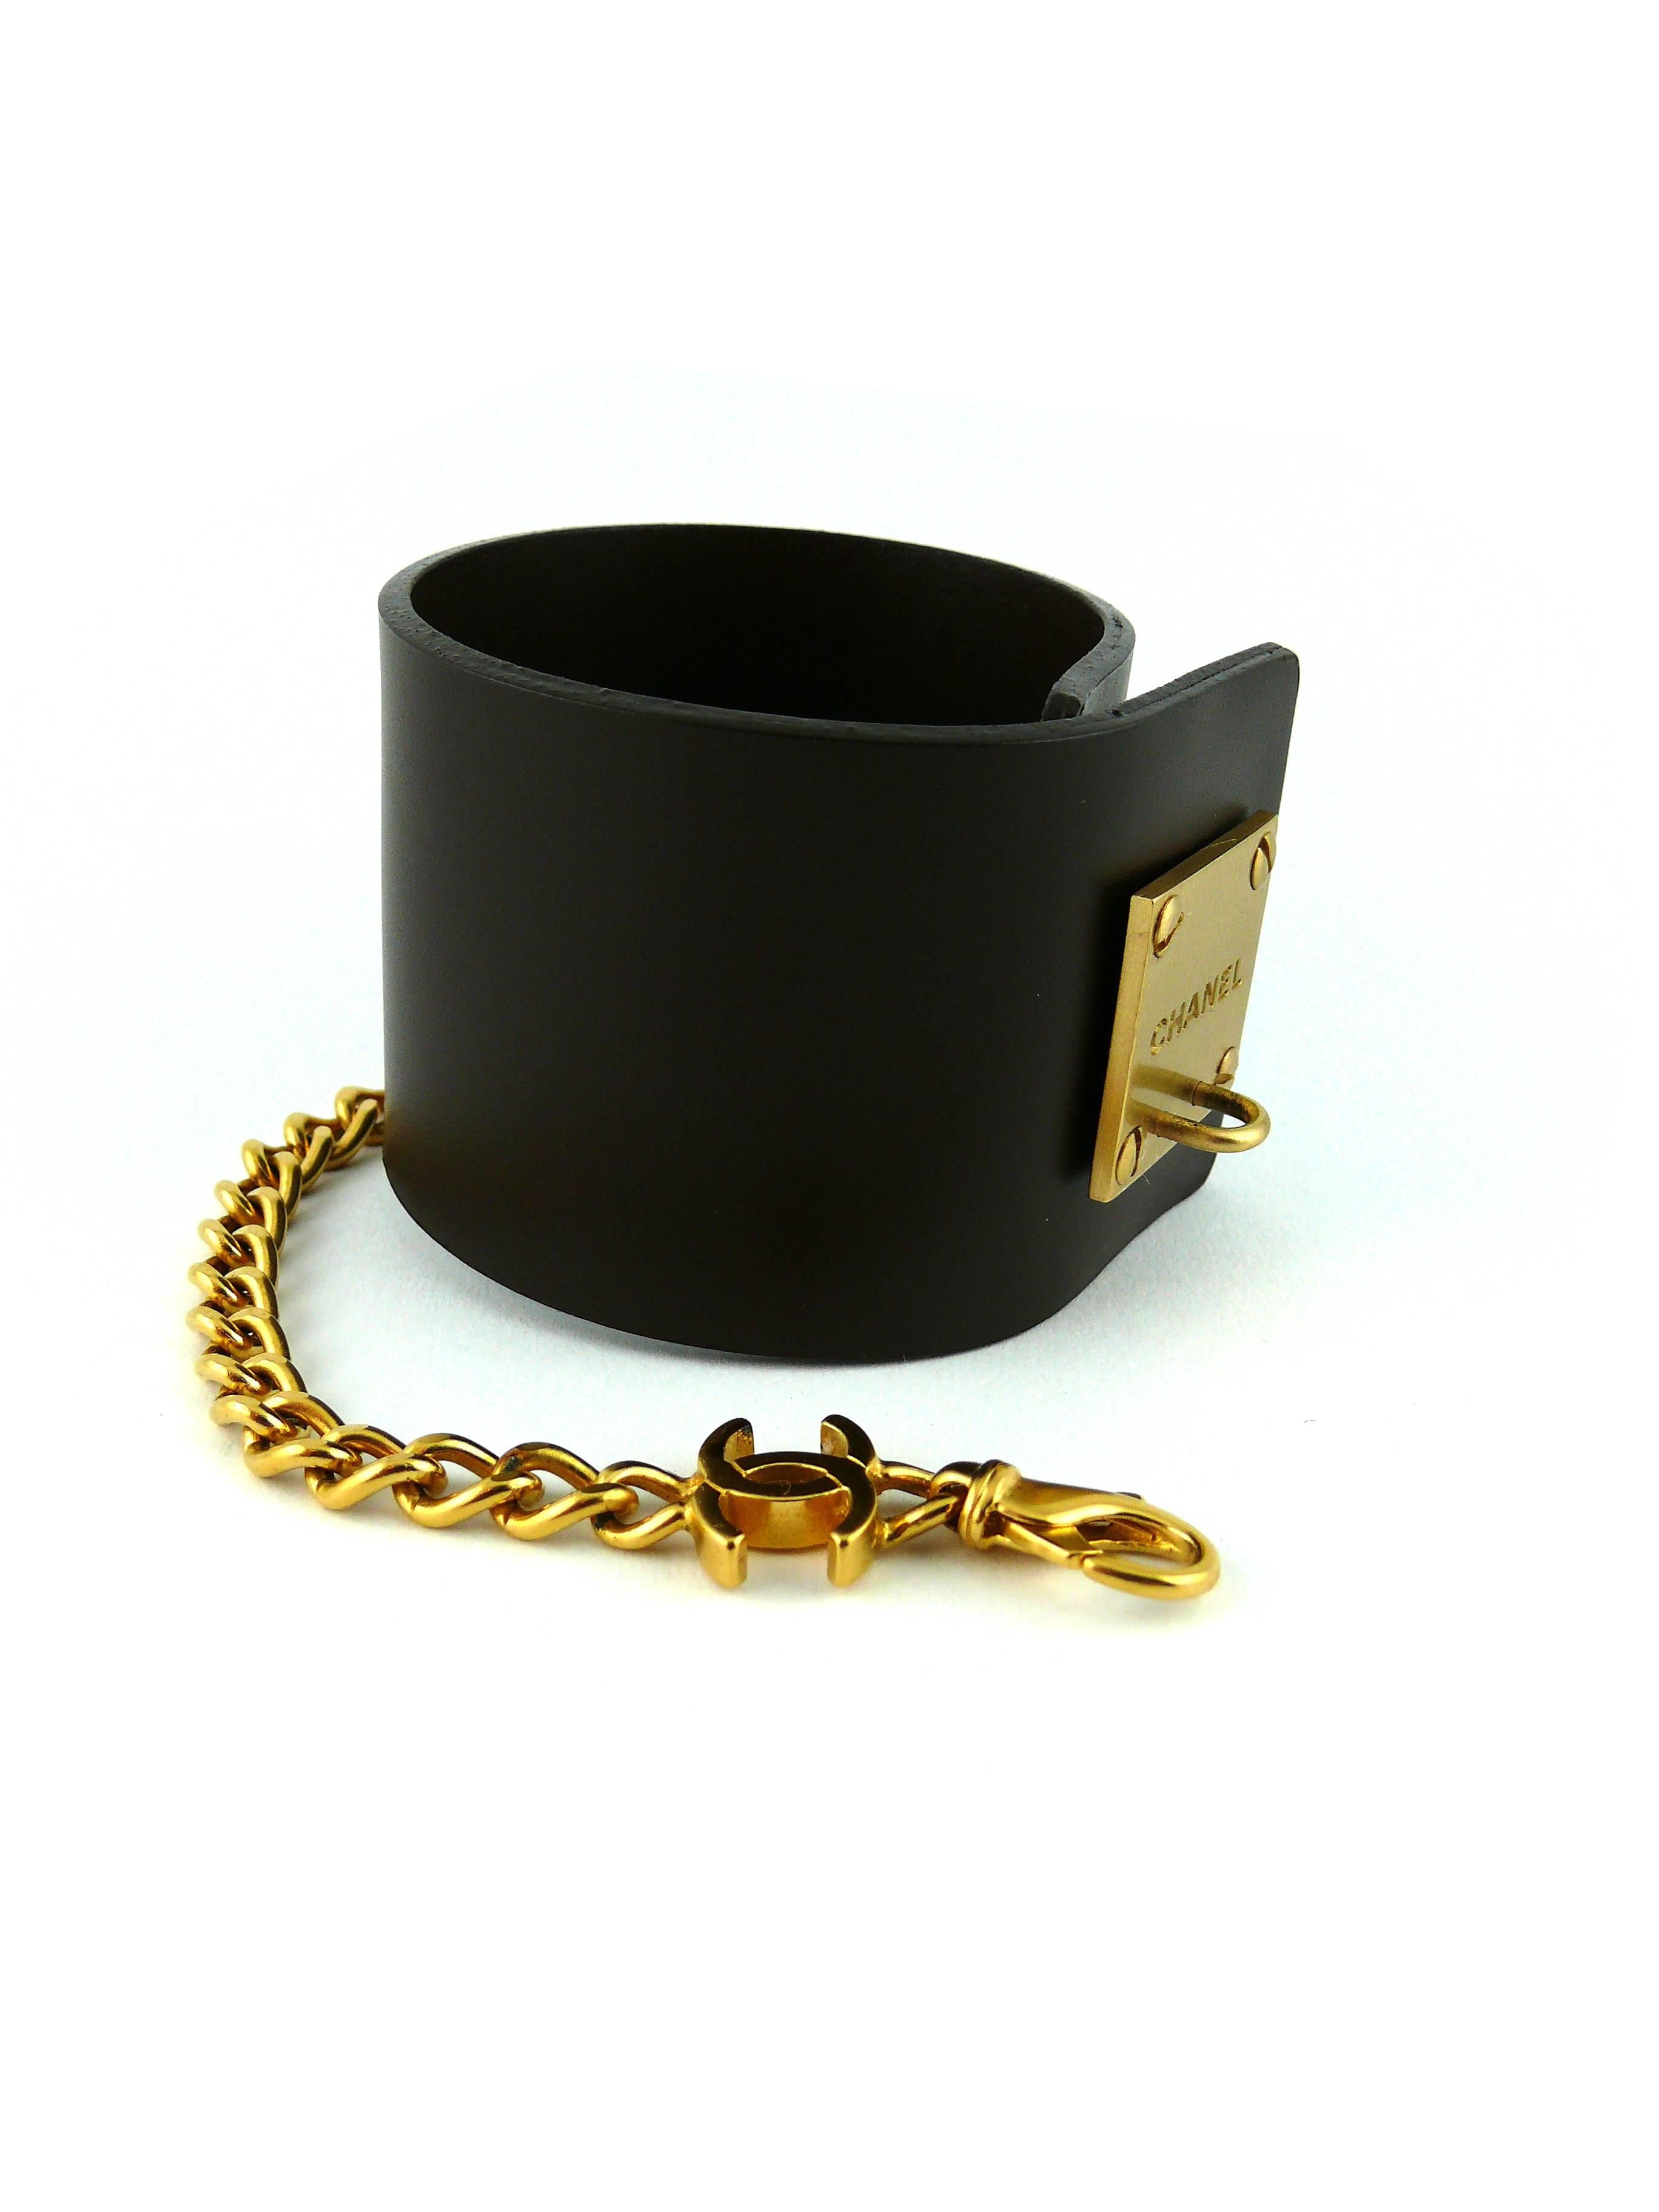 Chanel ID Tag and Chain Brown Leather Cuff Bracelet Spring 2003 1